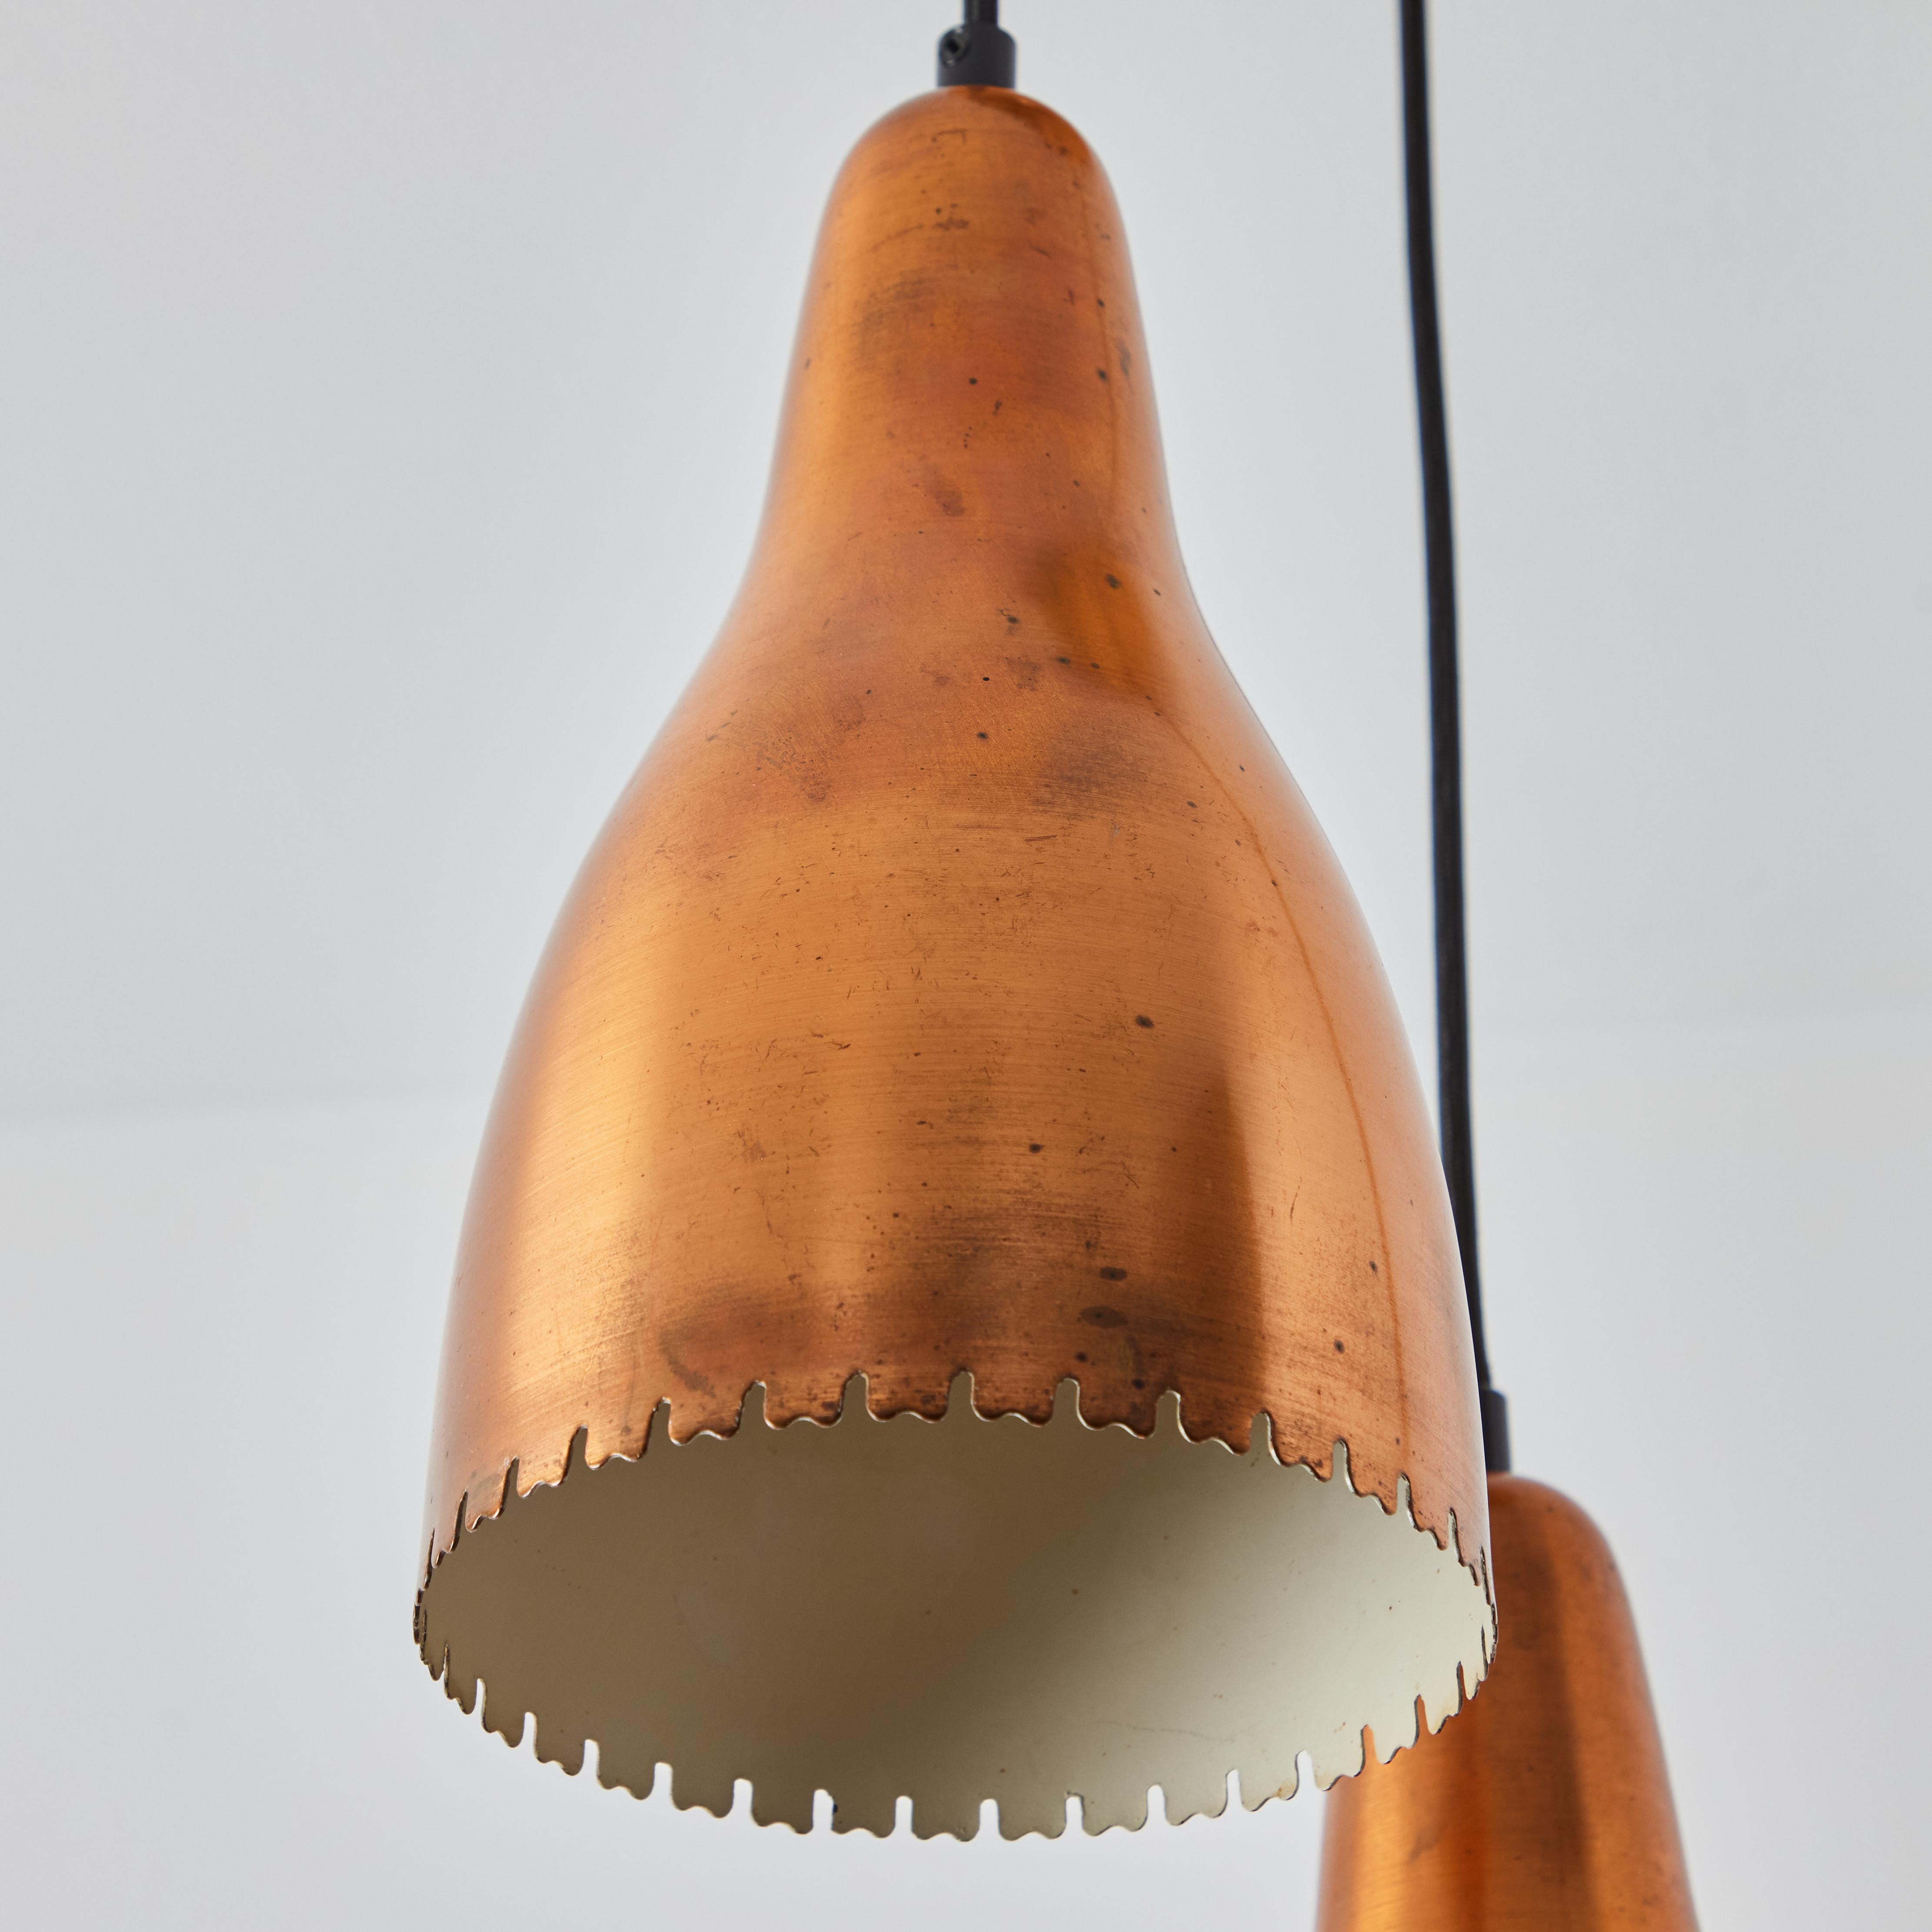 1950s Bent Karlby 3-Shade Chandelier in Copper for Lyfa. Executed in architecturally cut and elegantly shaped copper shades with an attractive patina, Denmark, circa 1950s. A quintessentially Danish Modern chandelier by a master Swedish designer